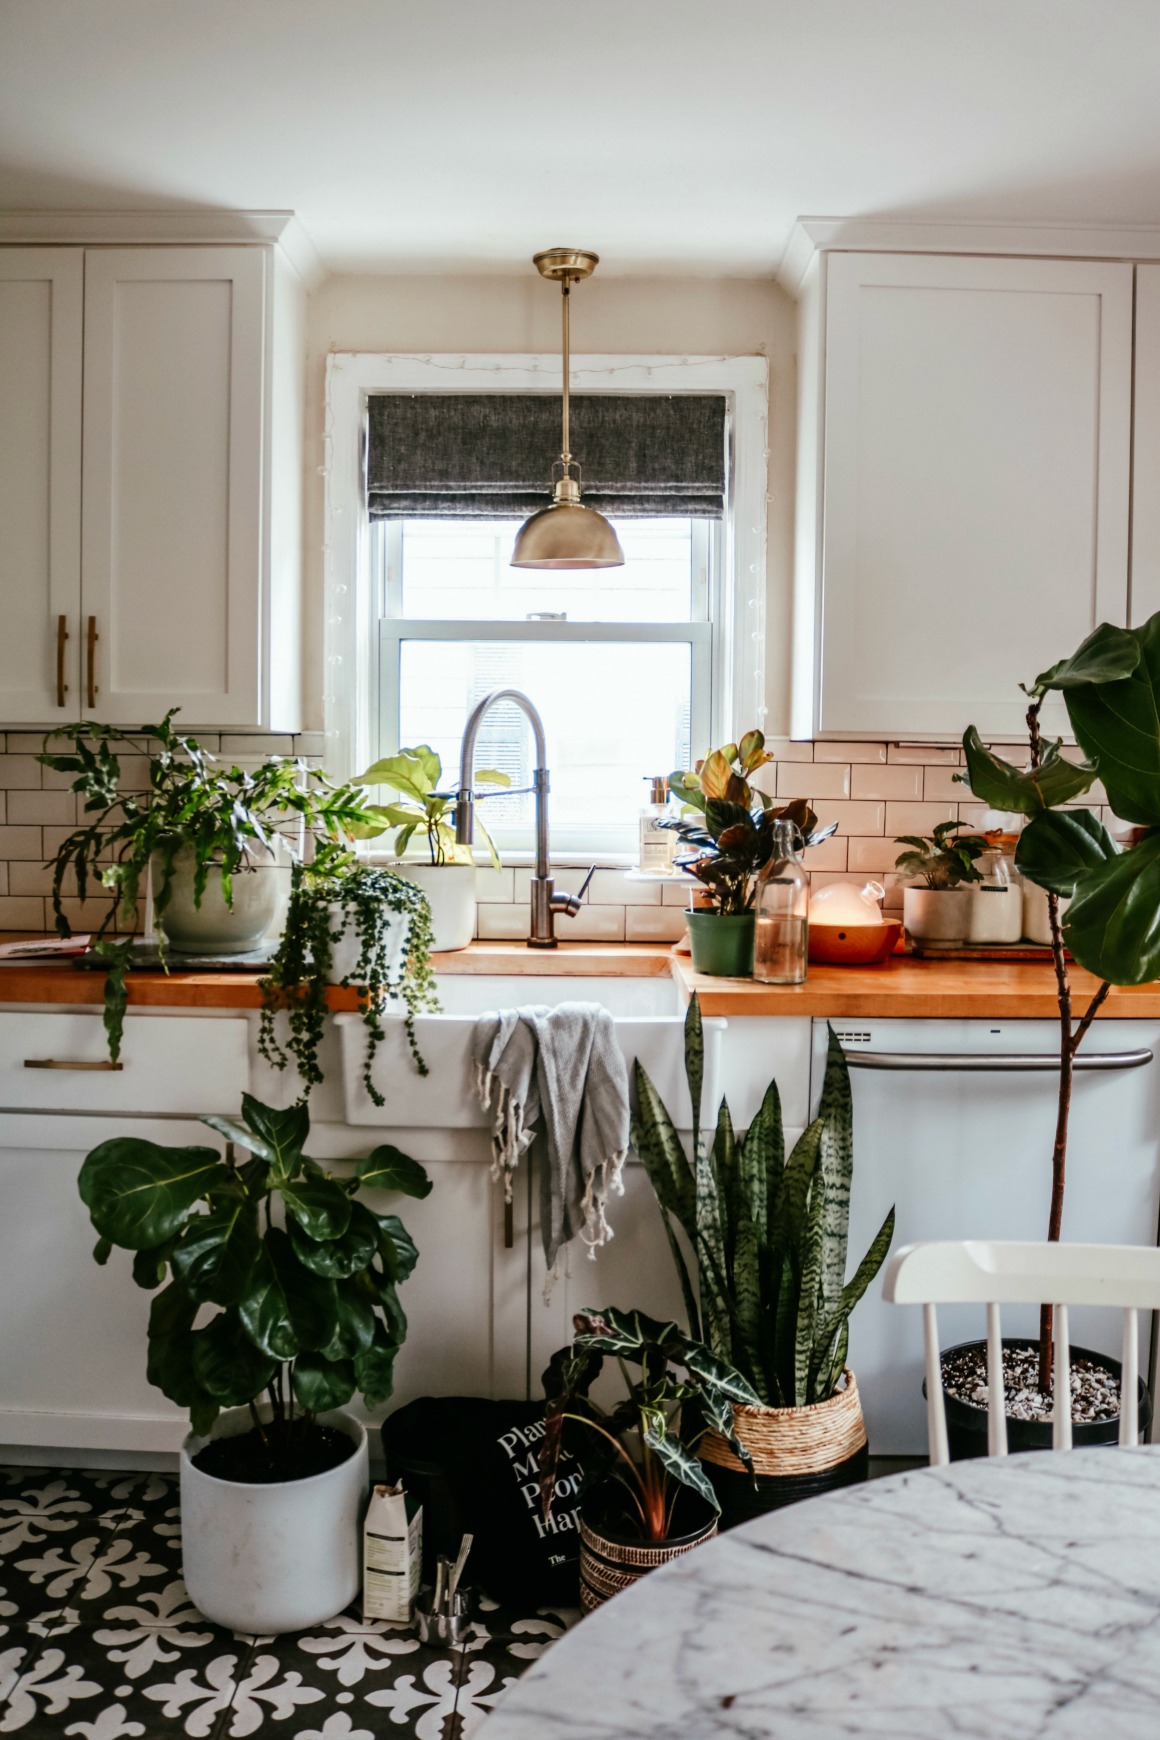 When to Fertilize Houseplants and Repot